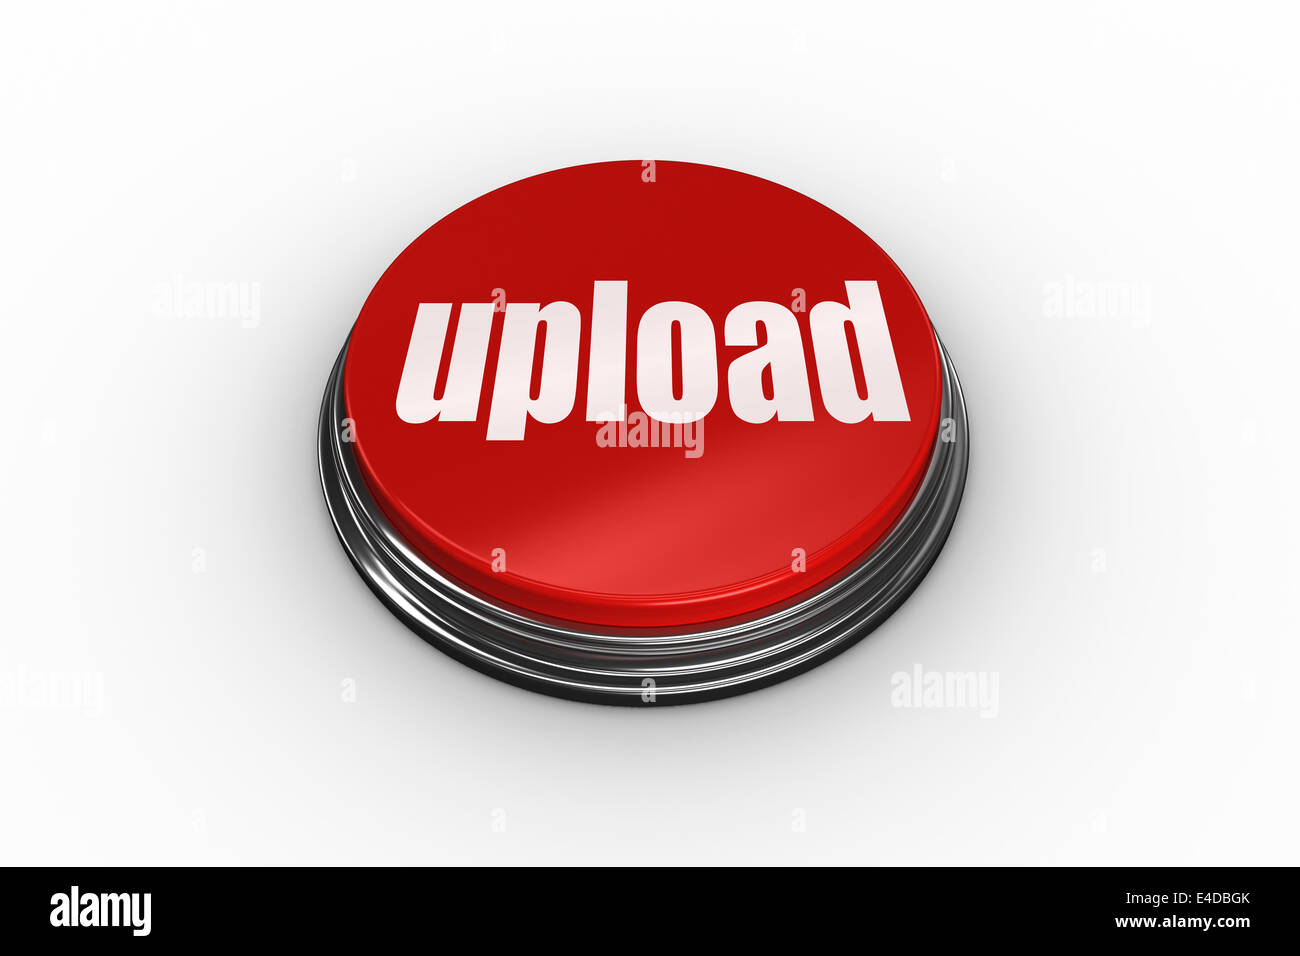 Upload on digitally generated red push button Stock Photo